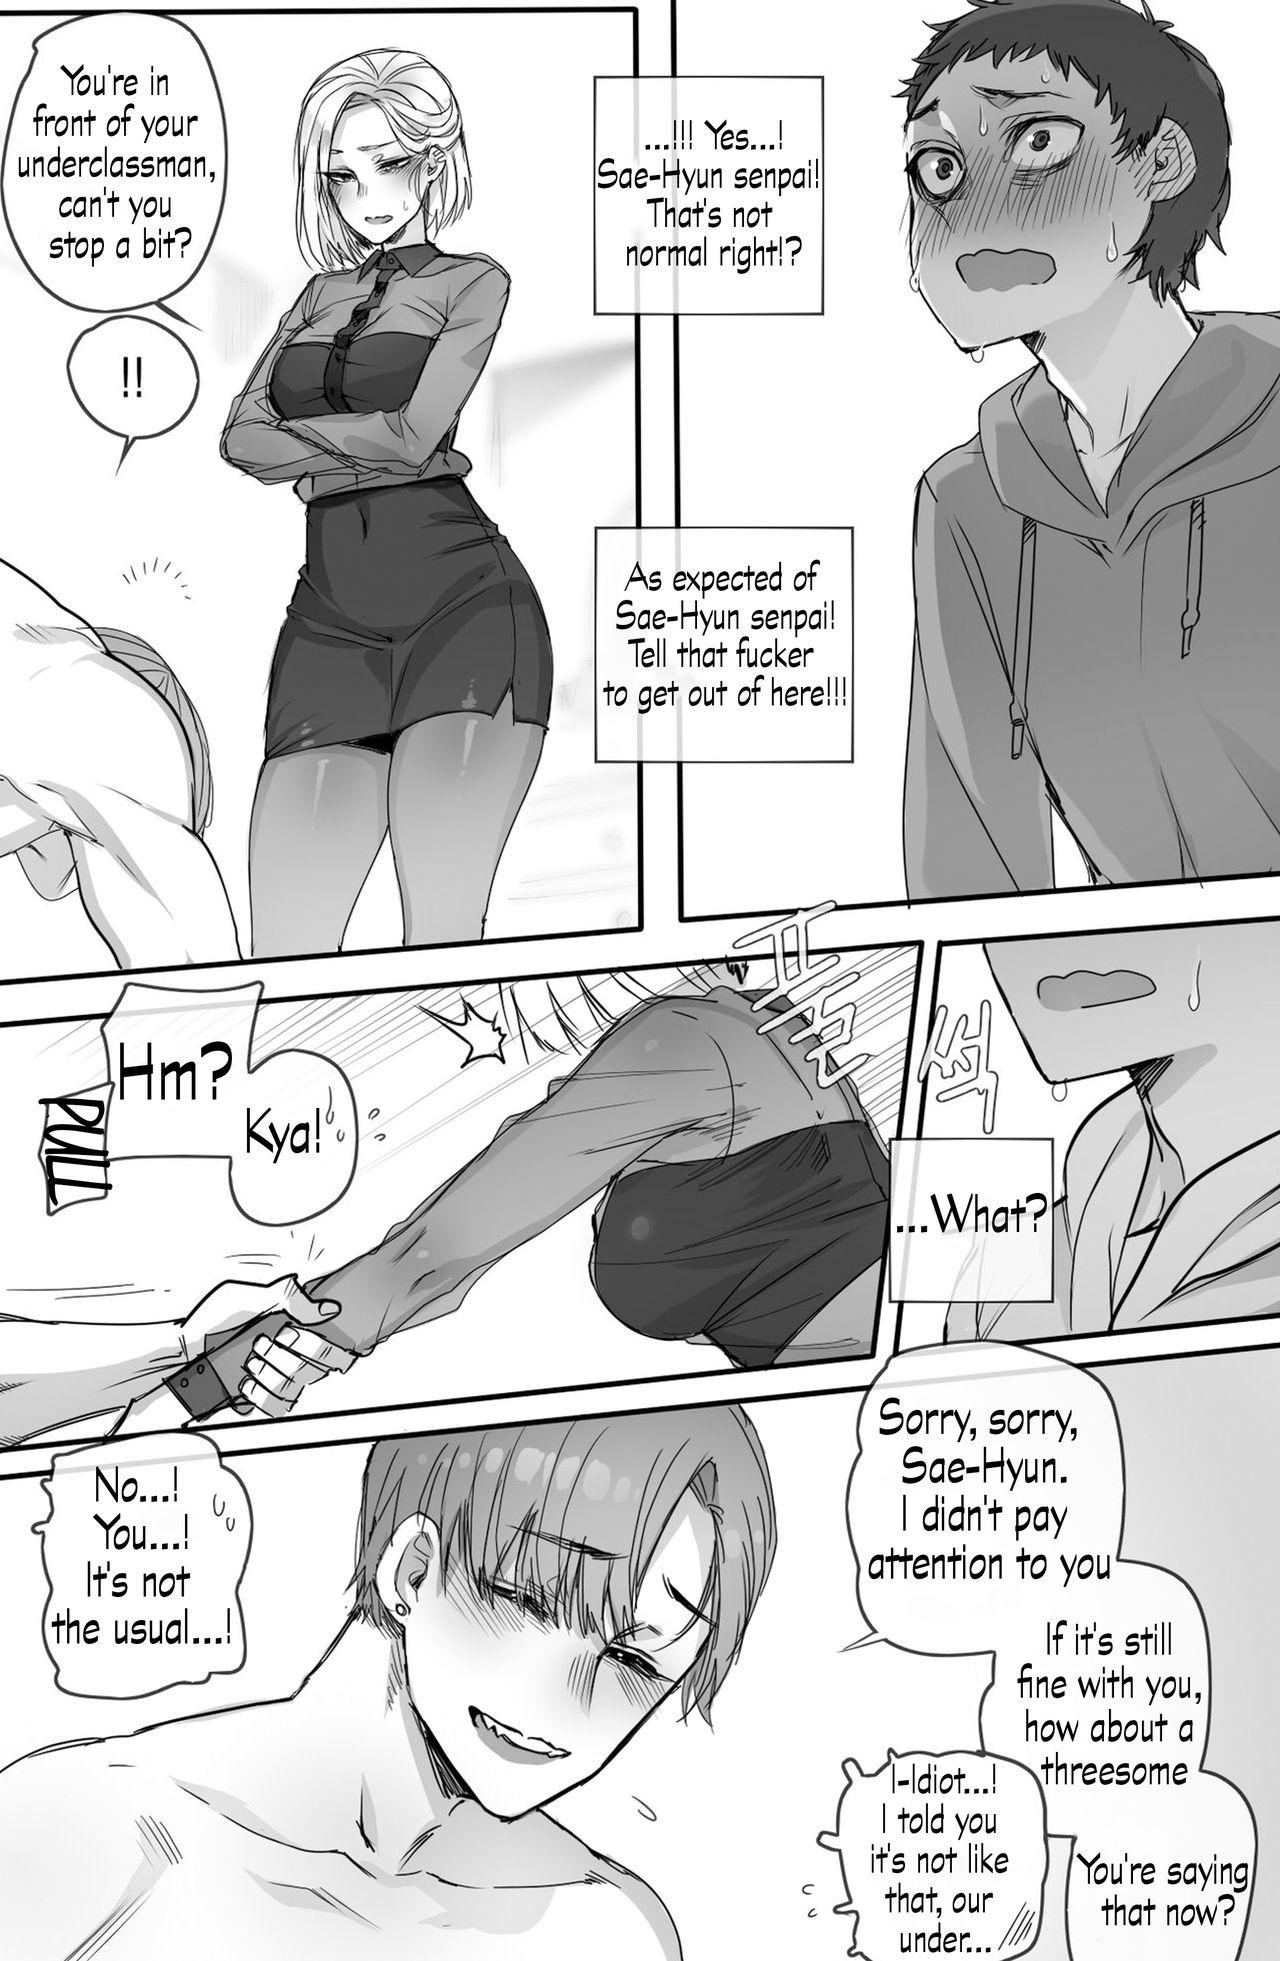 [ratatatat74] Why are you getting out from there [SH Translates] English 11